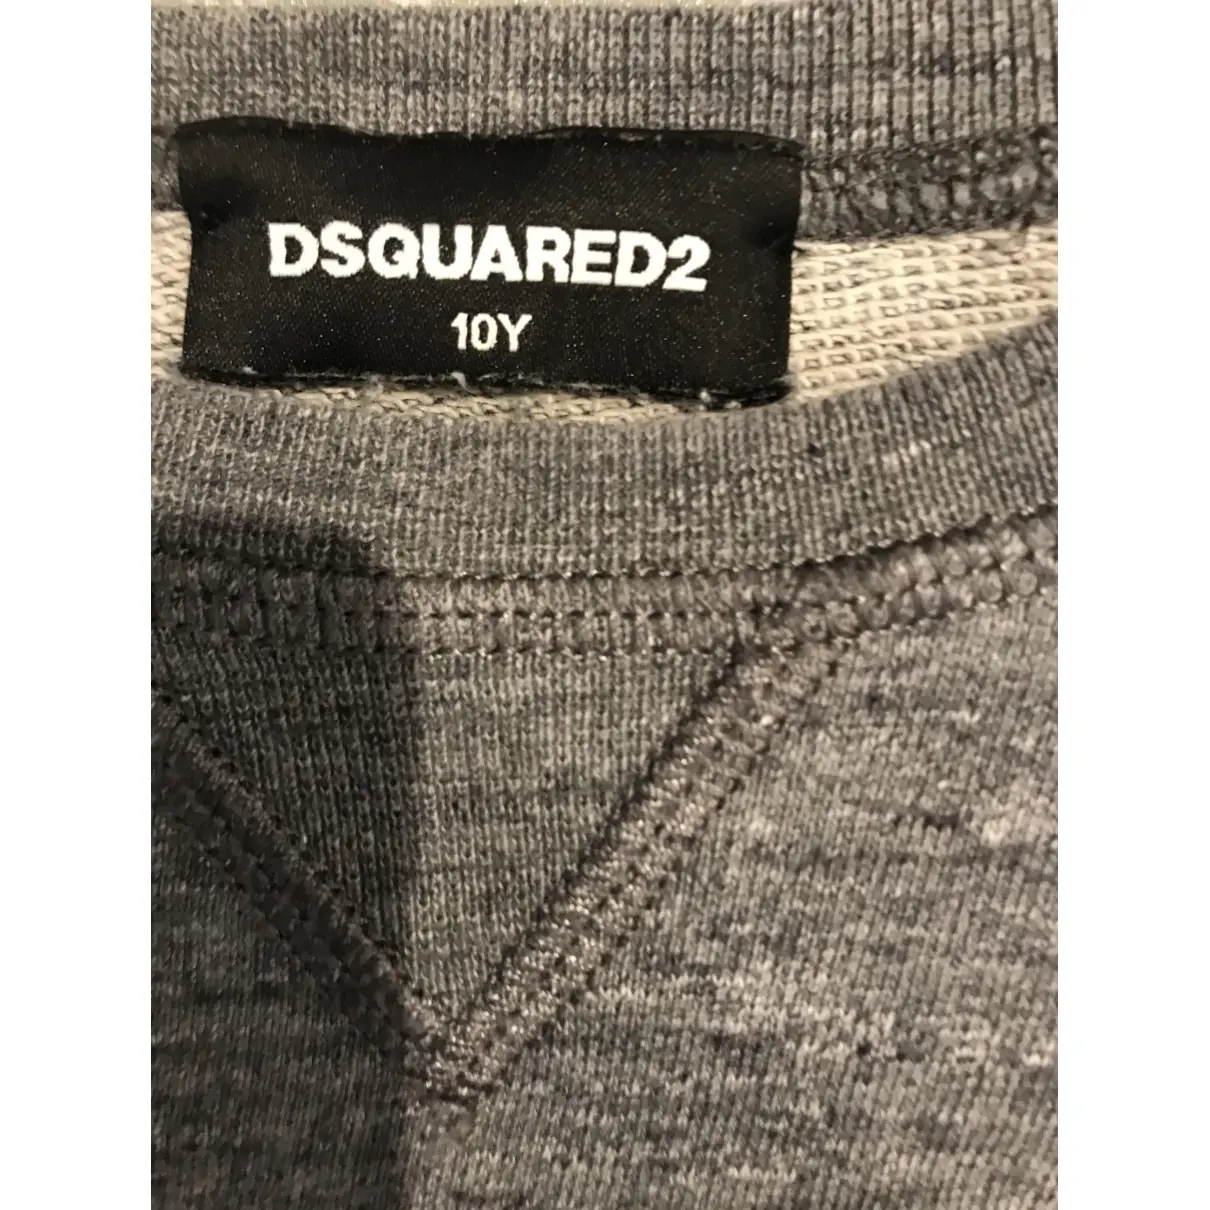 Buy Dsquared2 Anthracite Cotton Knitwear online